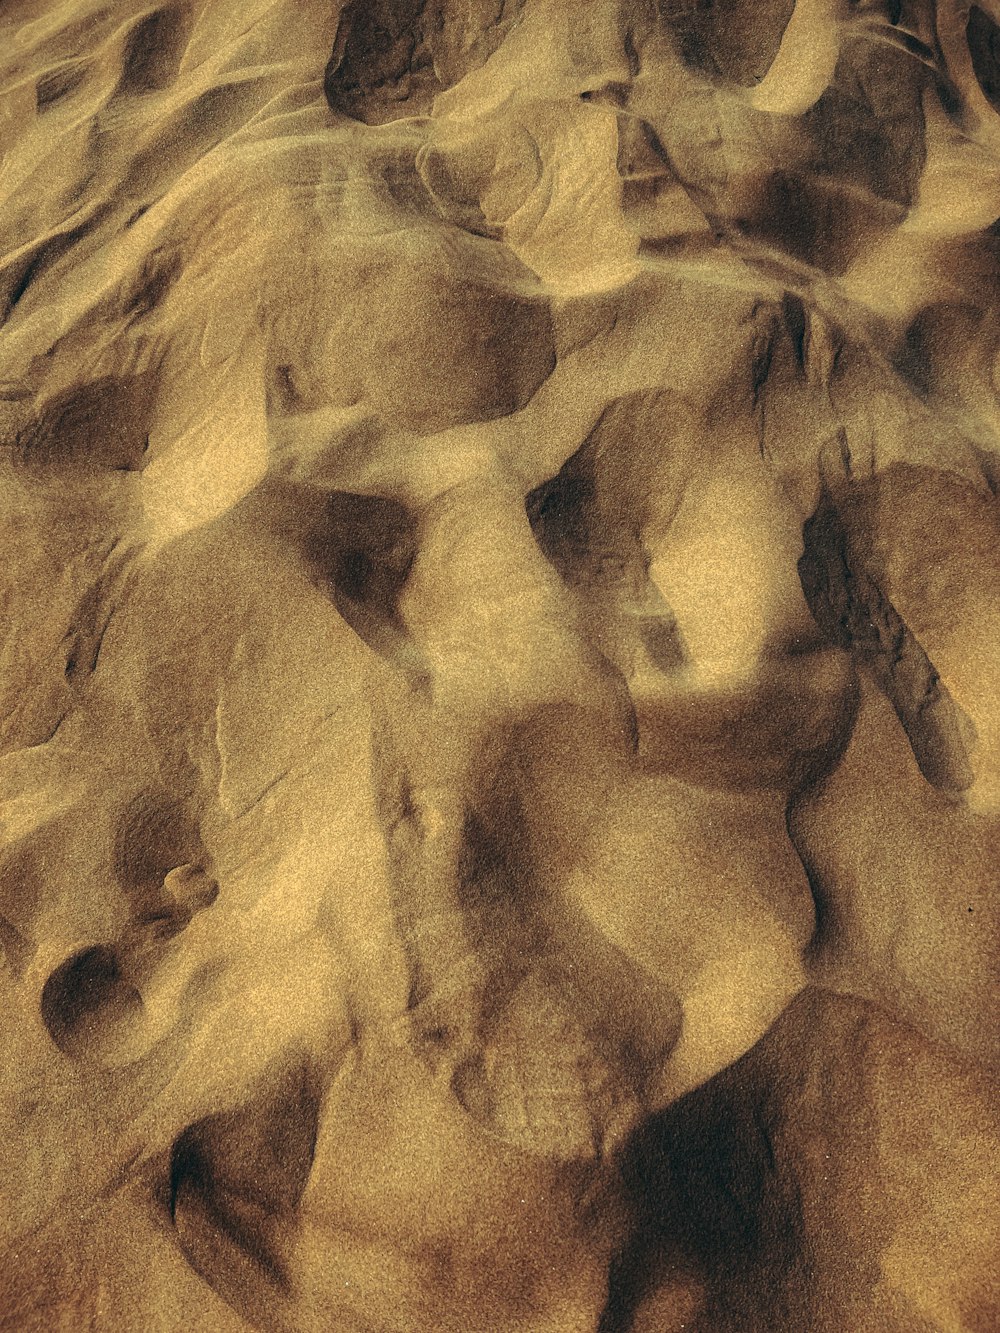 a close up of sand and rocks with a sky background